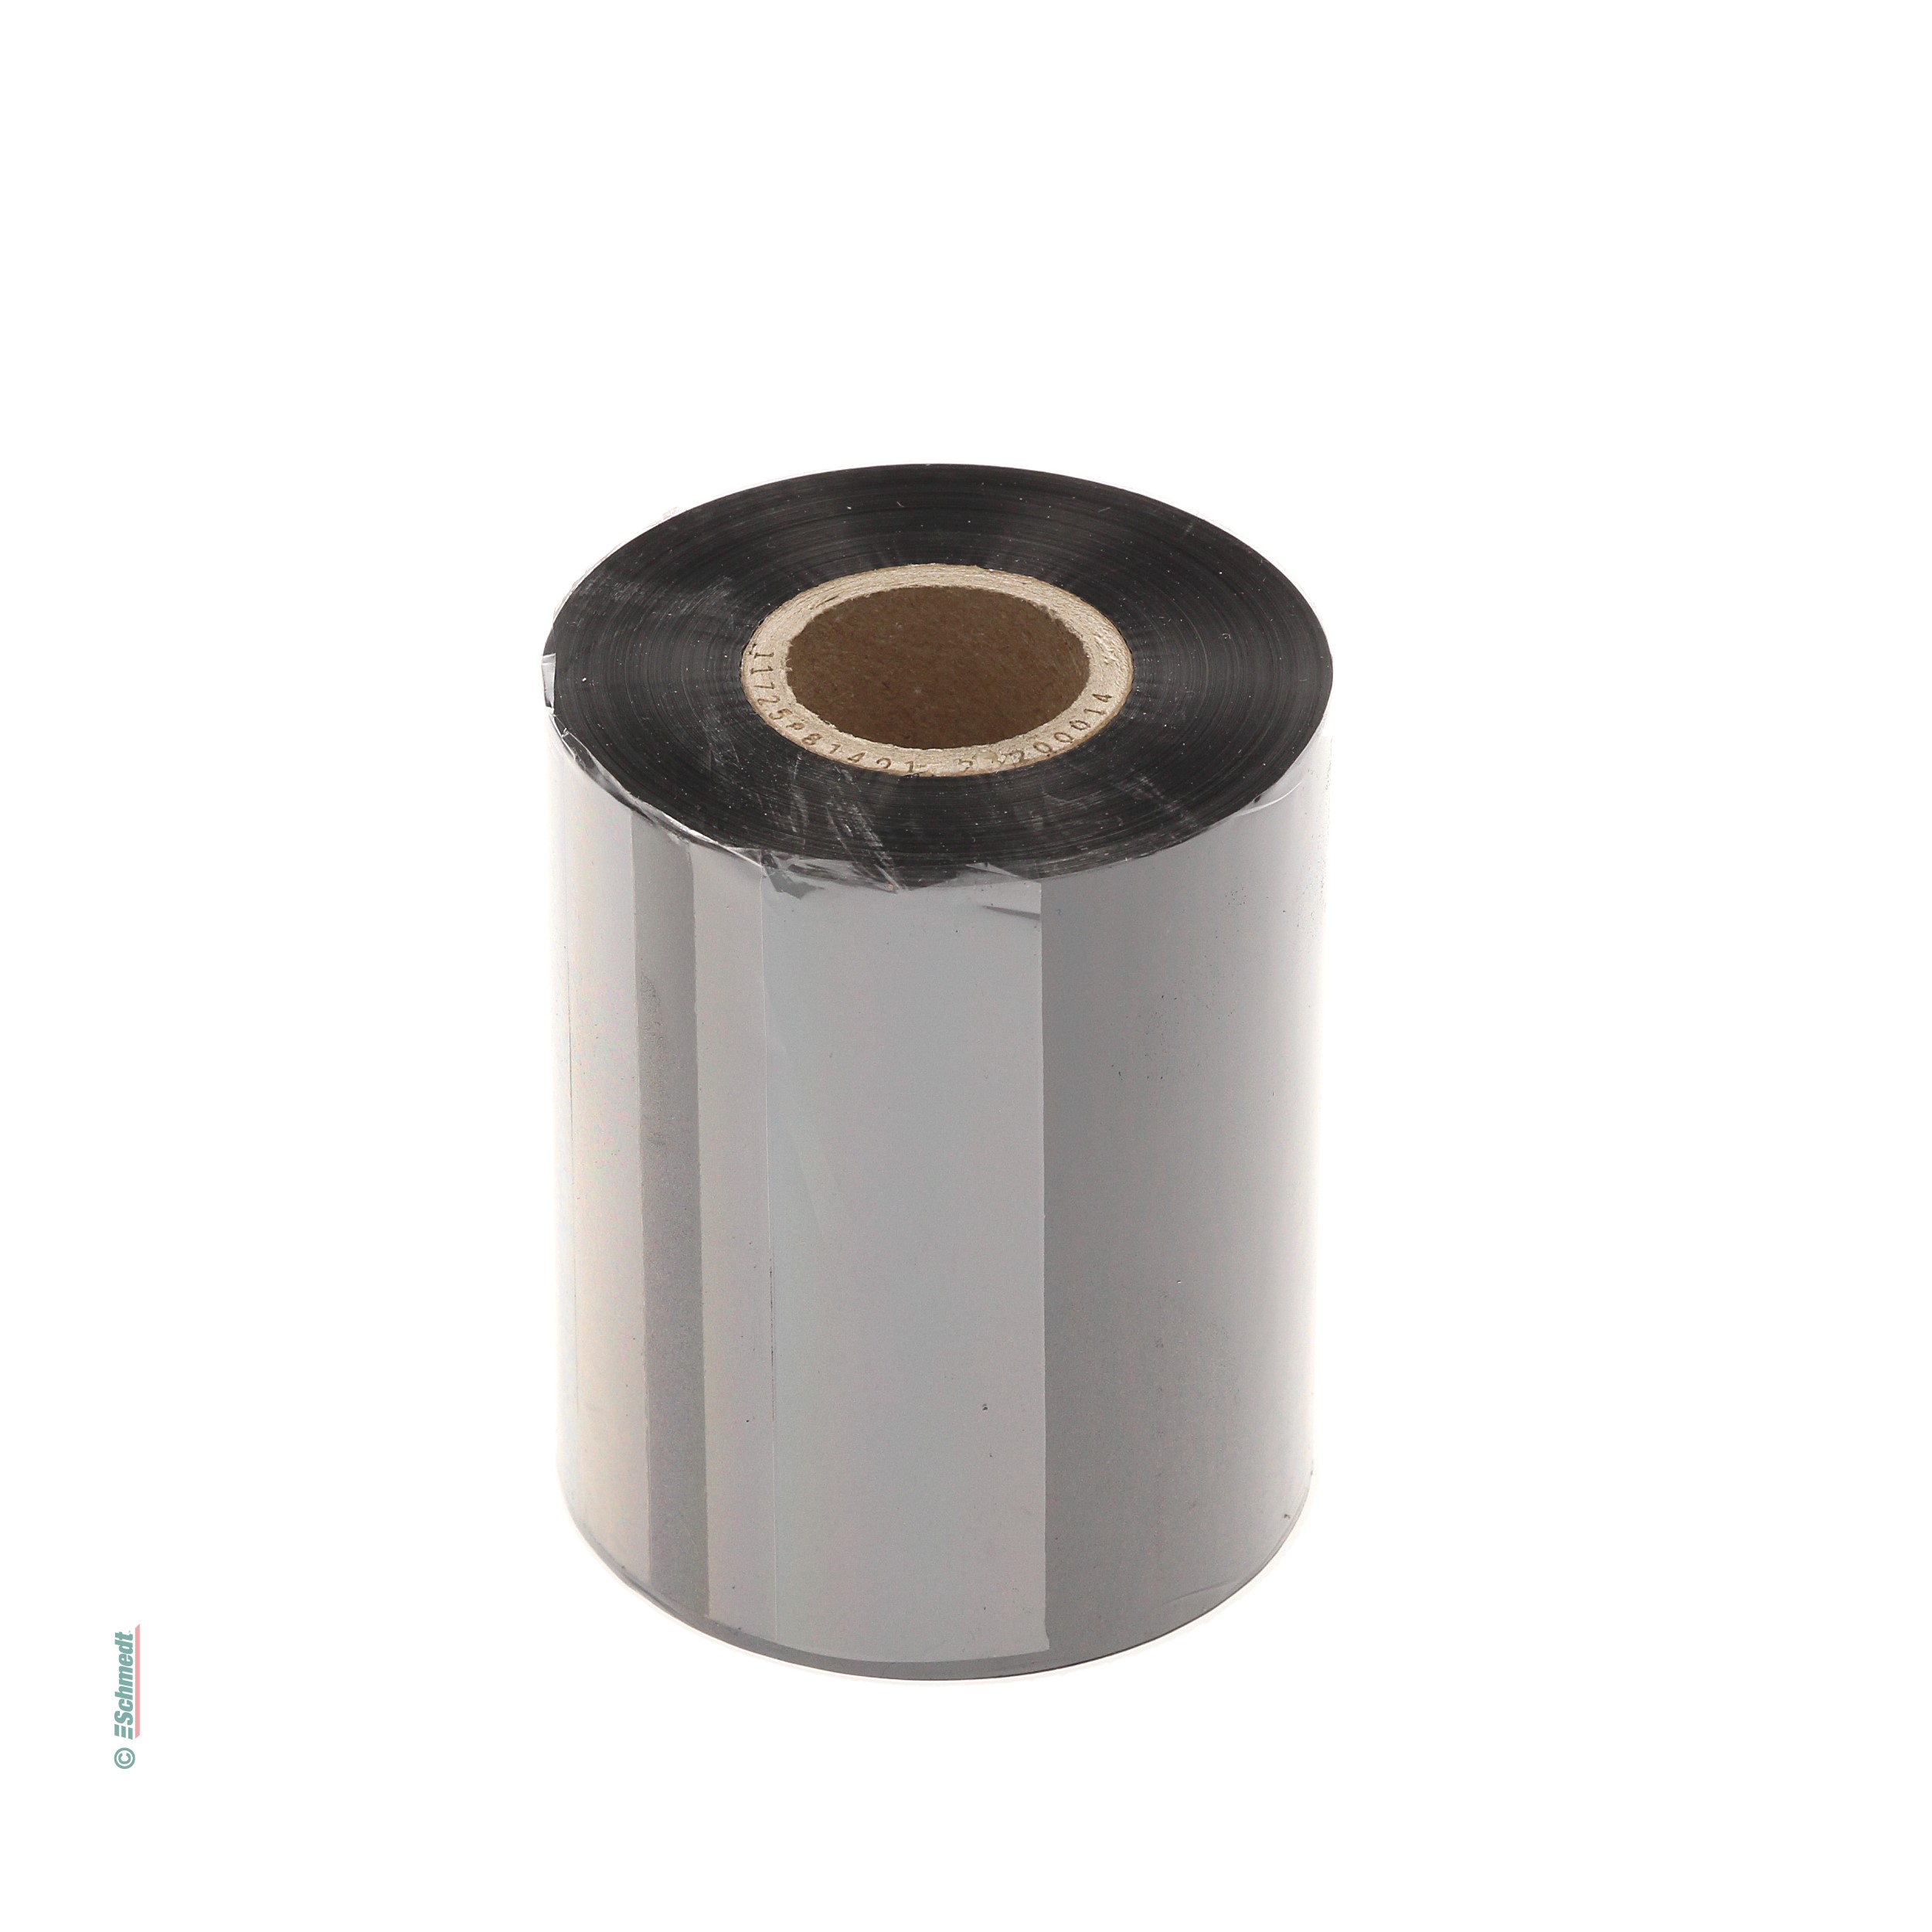 Transfer foil TR 4022 for DMX M-4206 MK - Roll dimensions: 80 mm x 300 m - » (outer winding) - core 25 mm...